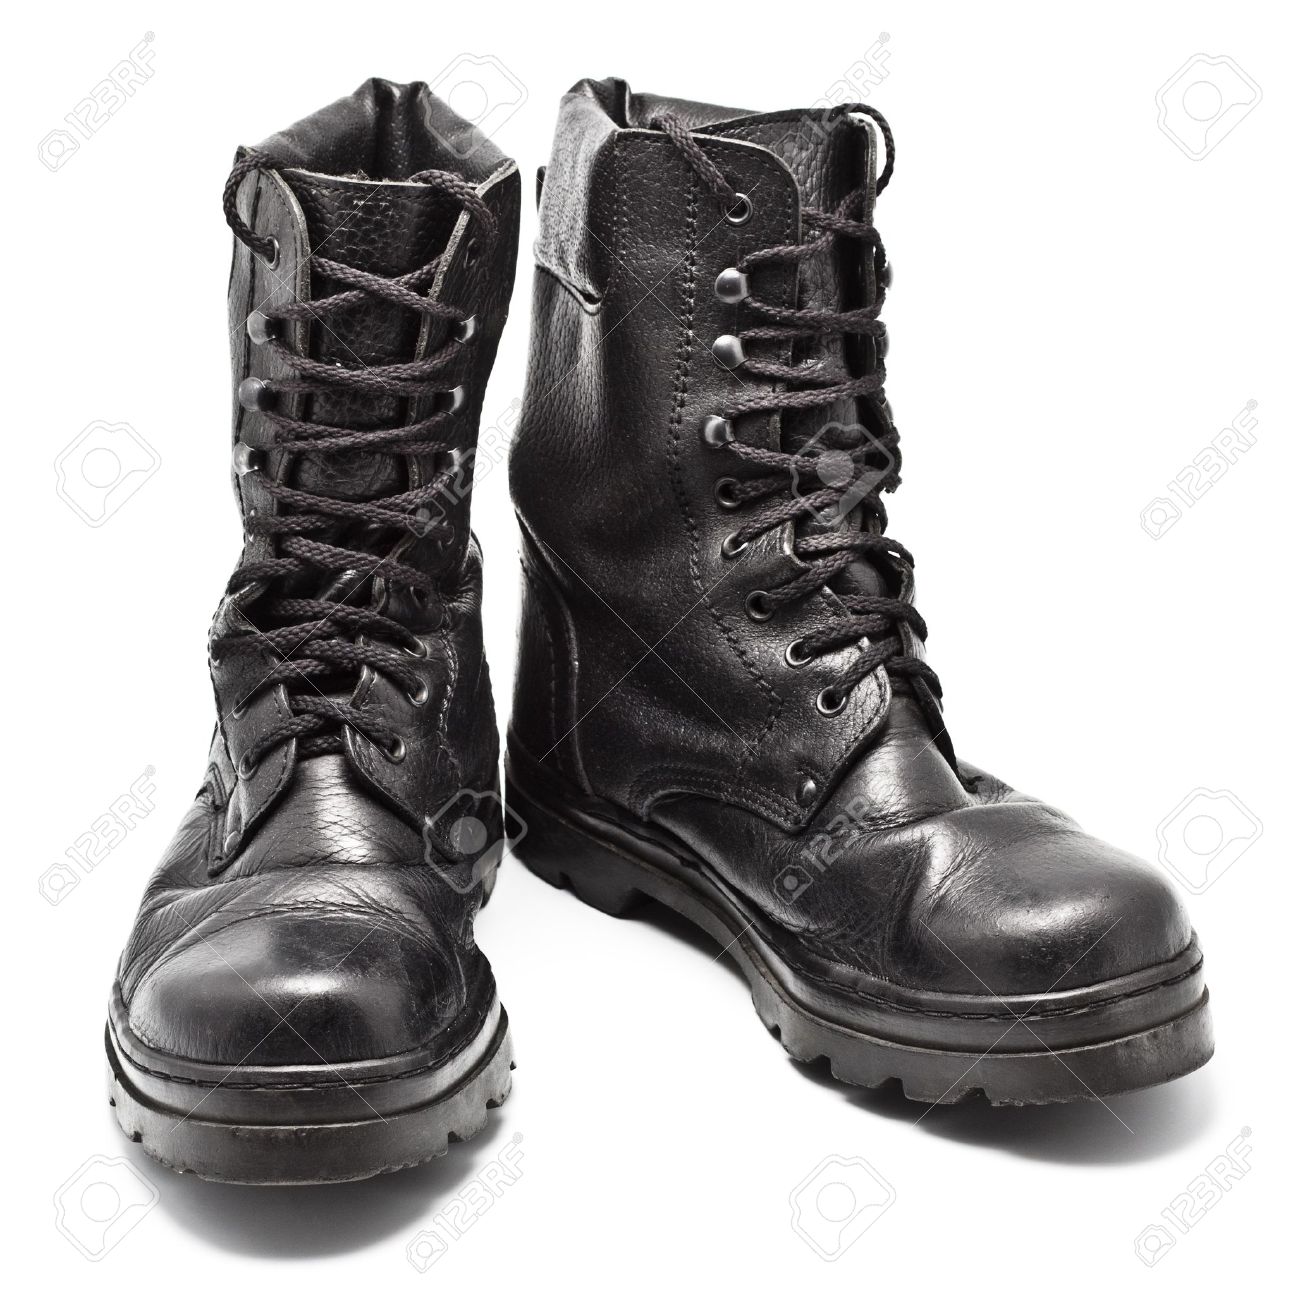 military boots: black leather army boots isolated on white CQXKGFS